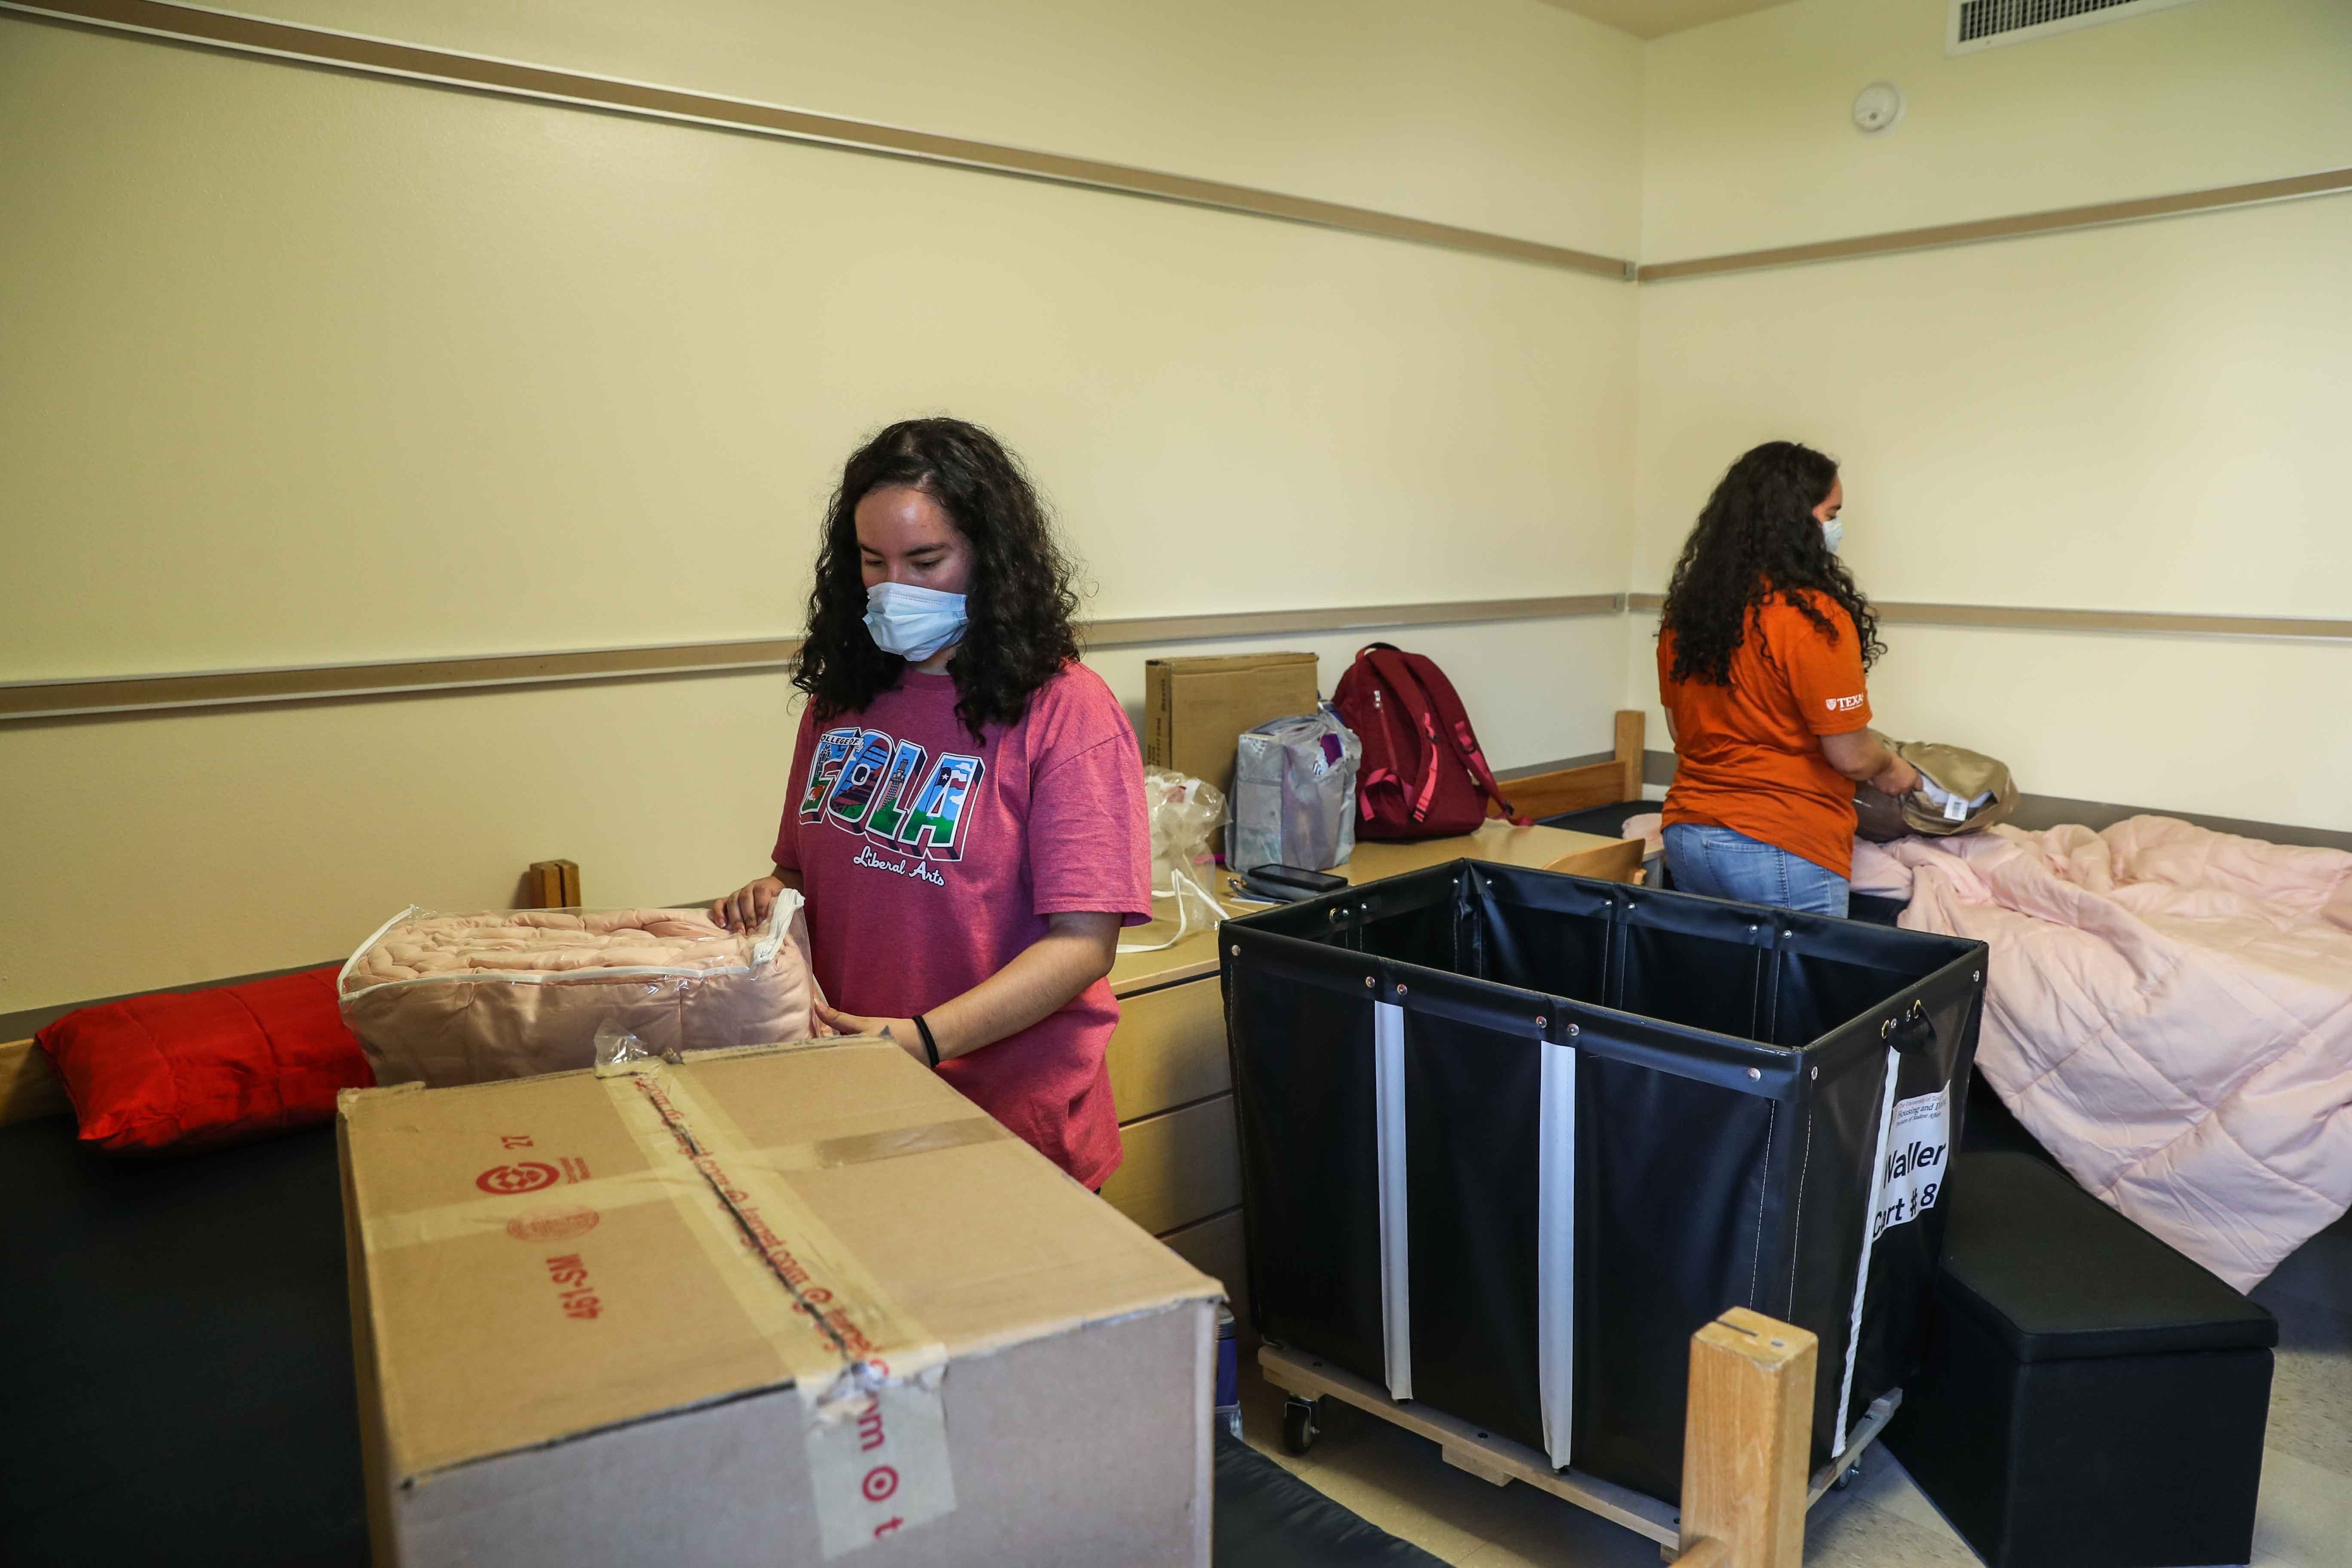 Alexis and Alyssa Hernandez start to unpack their belongings after arriving in their new room in the Jester West Dormitory at the University of Texas in Austin on Thursday, August 20, 2020.